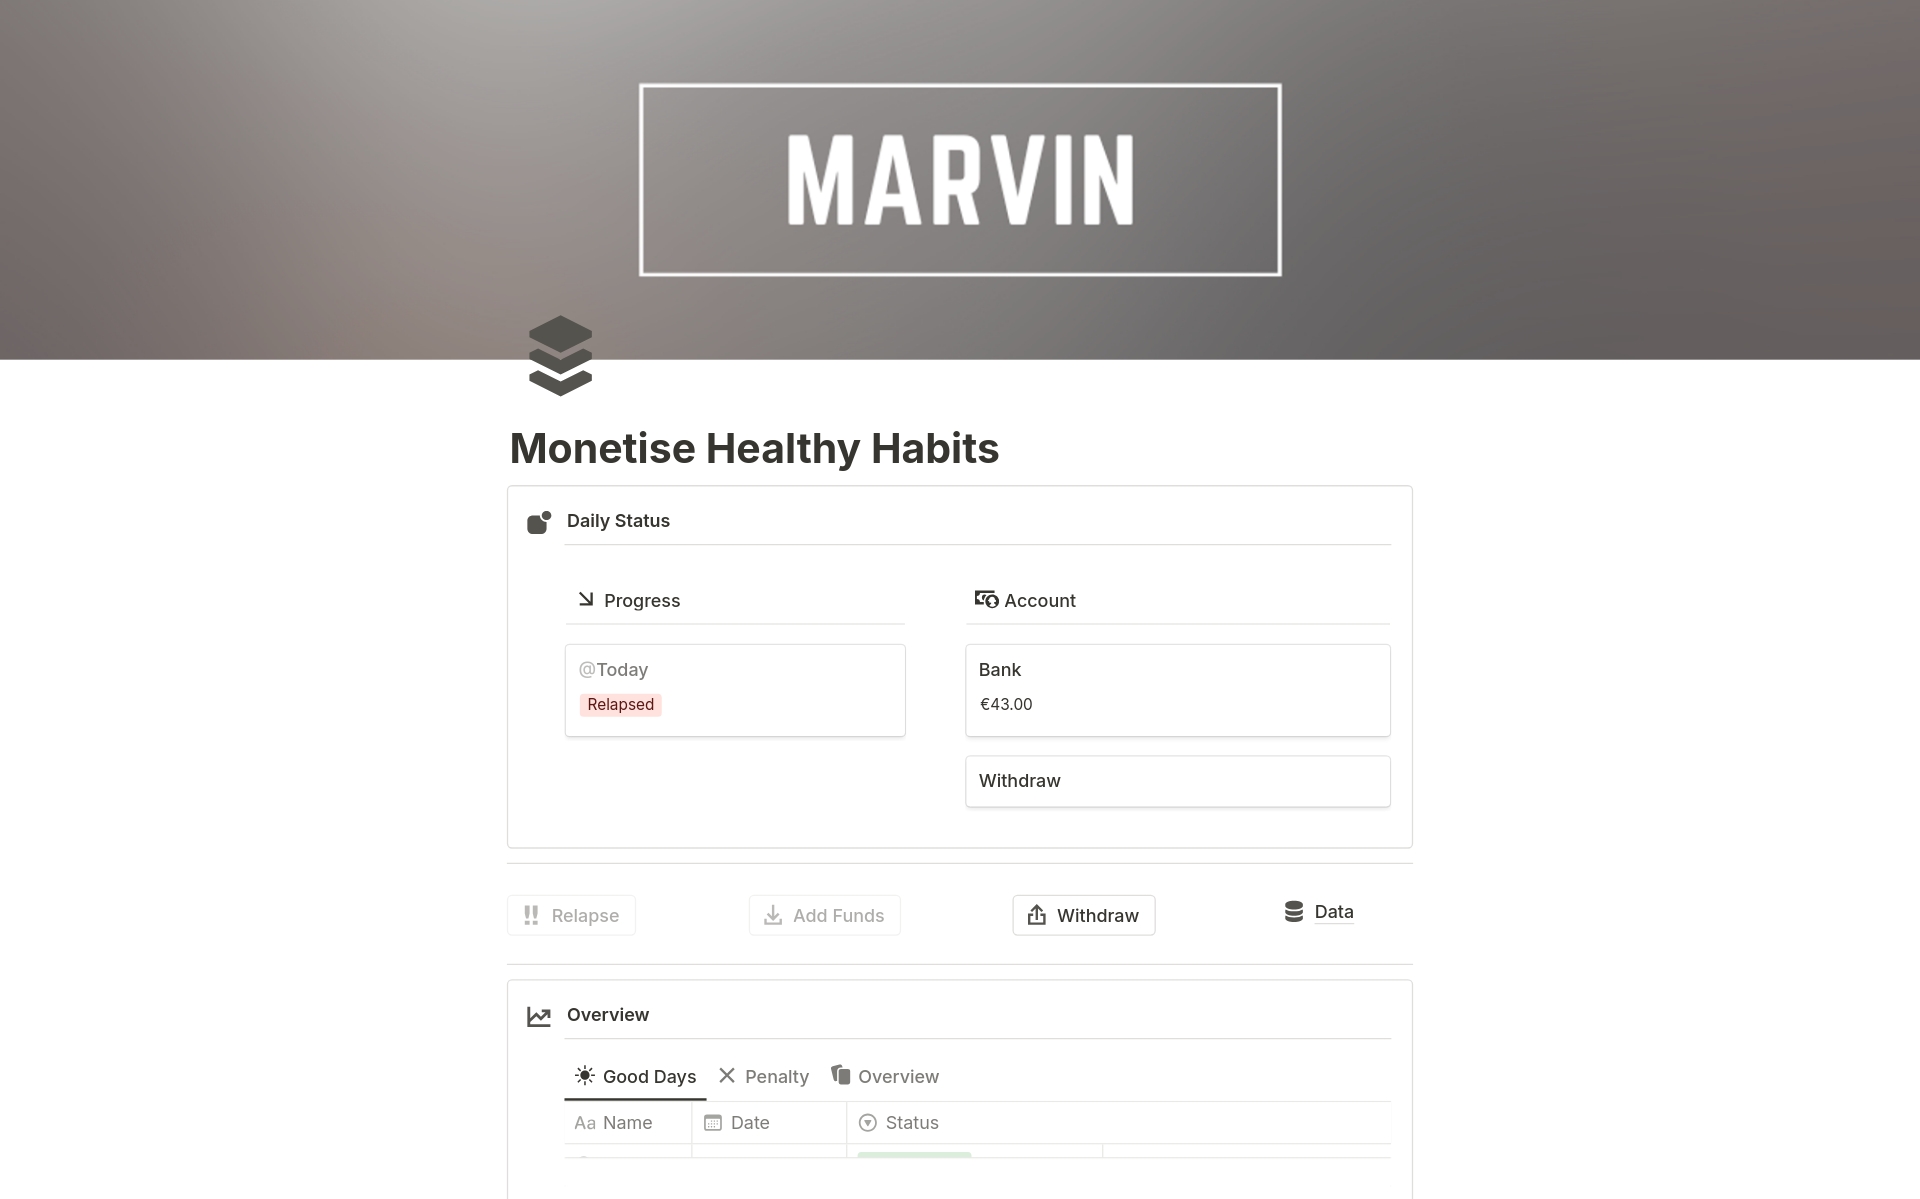 Welcome to Marvin.
Monetise your healthy habits by taking control of your actions. Simply enter in the triggers and create deposits for your accounts to make every bad action accountable.